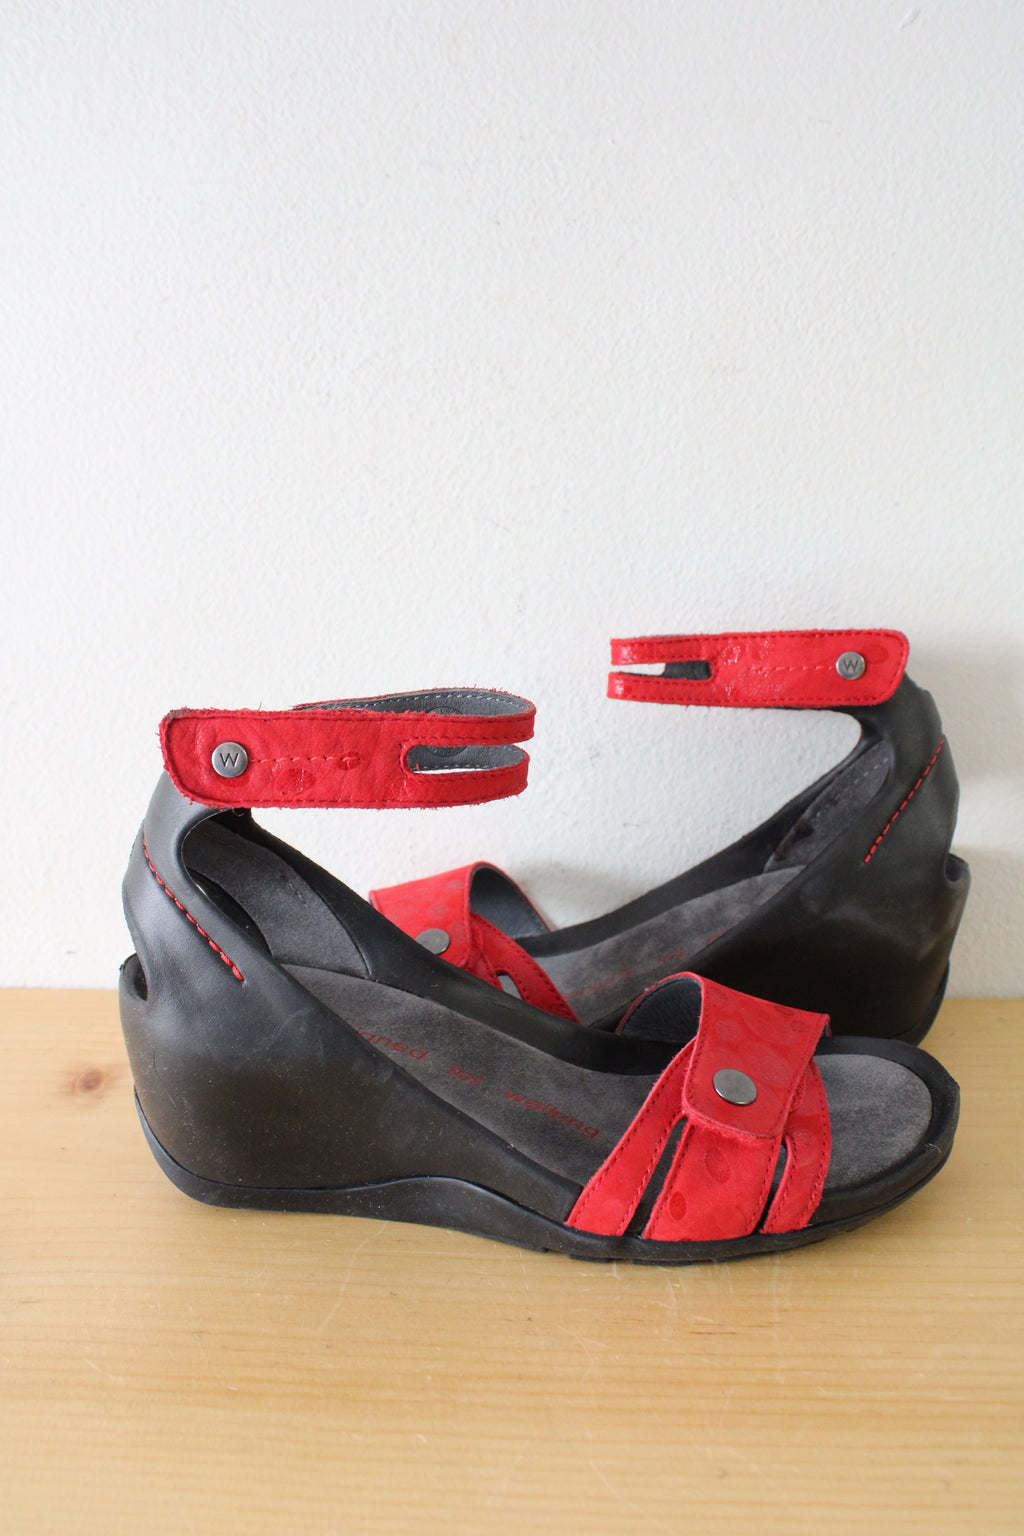 Wolky Red Velcro Strap Black Wedge Sandals | Size 37 (6.5)